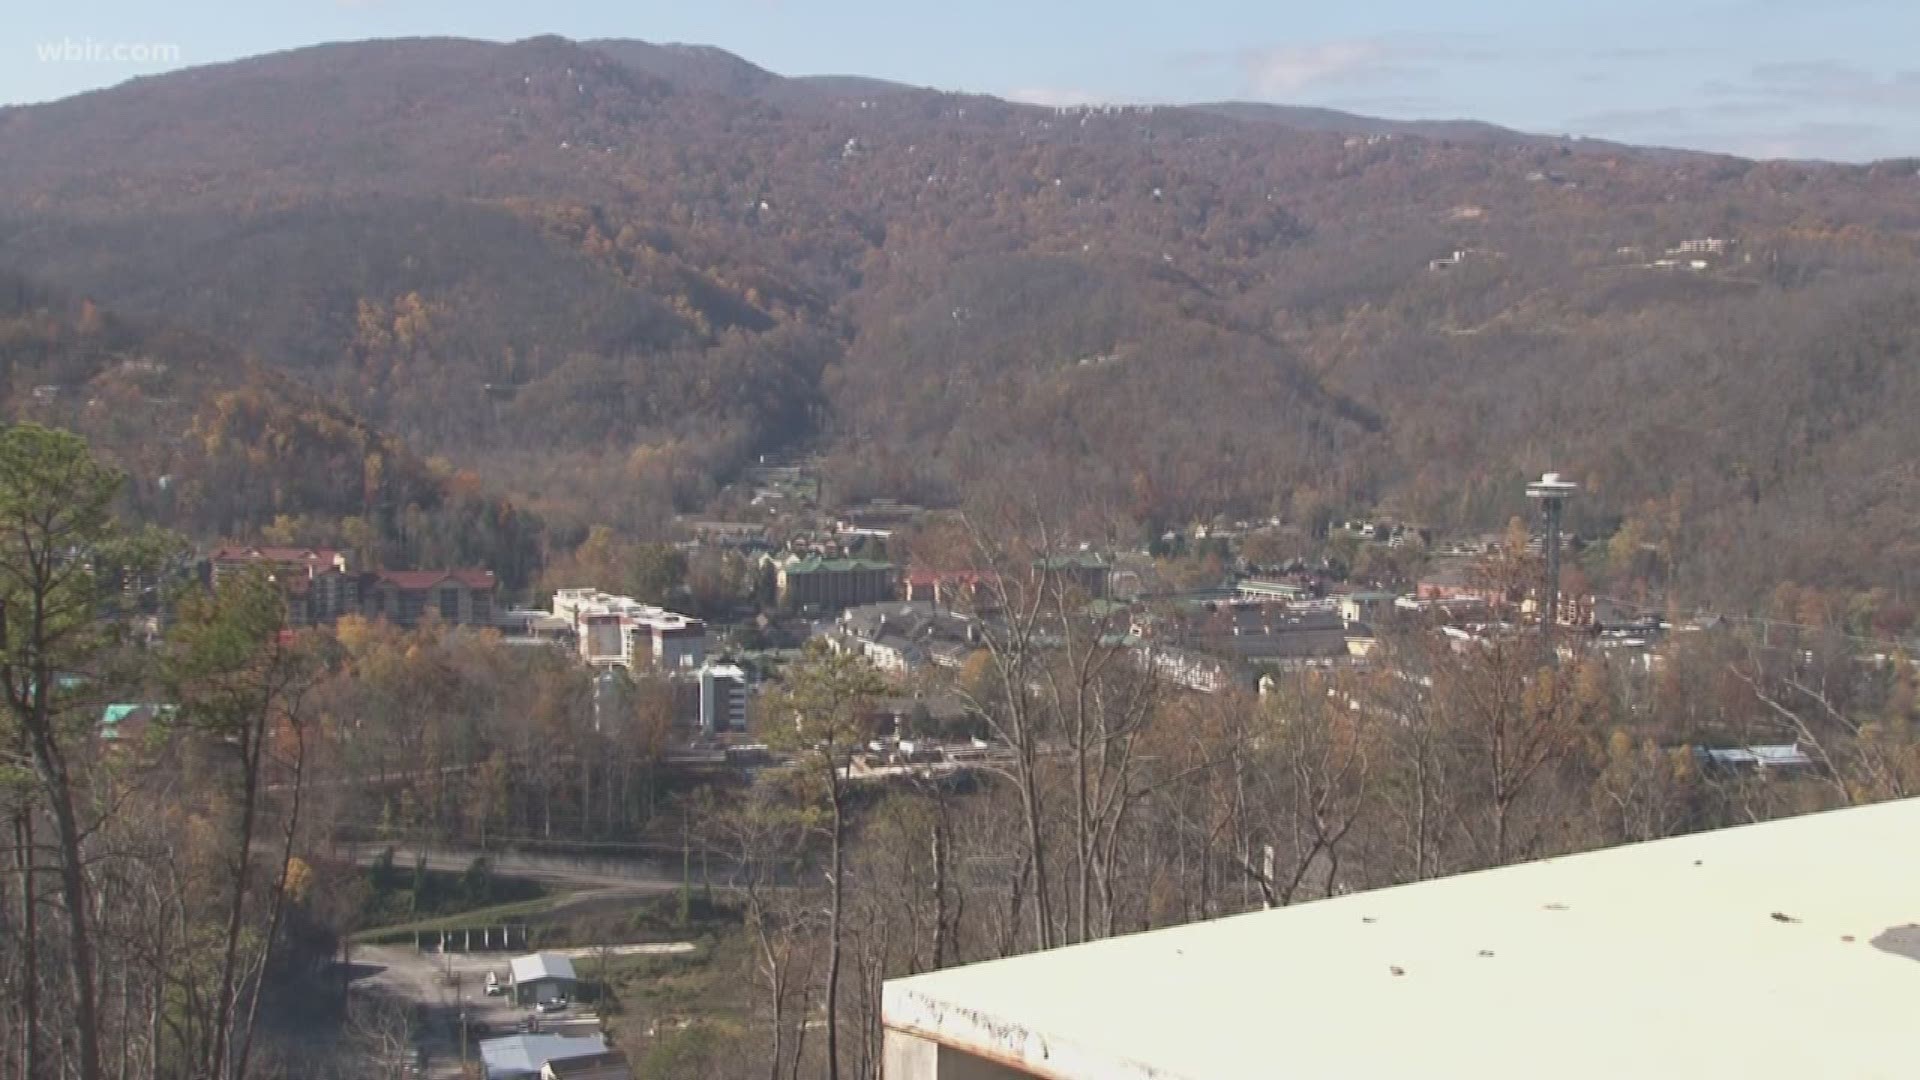 In Gatlinburg, 2017 will be marked by strength, resiliency and healing after the wildfires.  It's a year the community is thankful to put behind them.